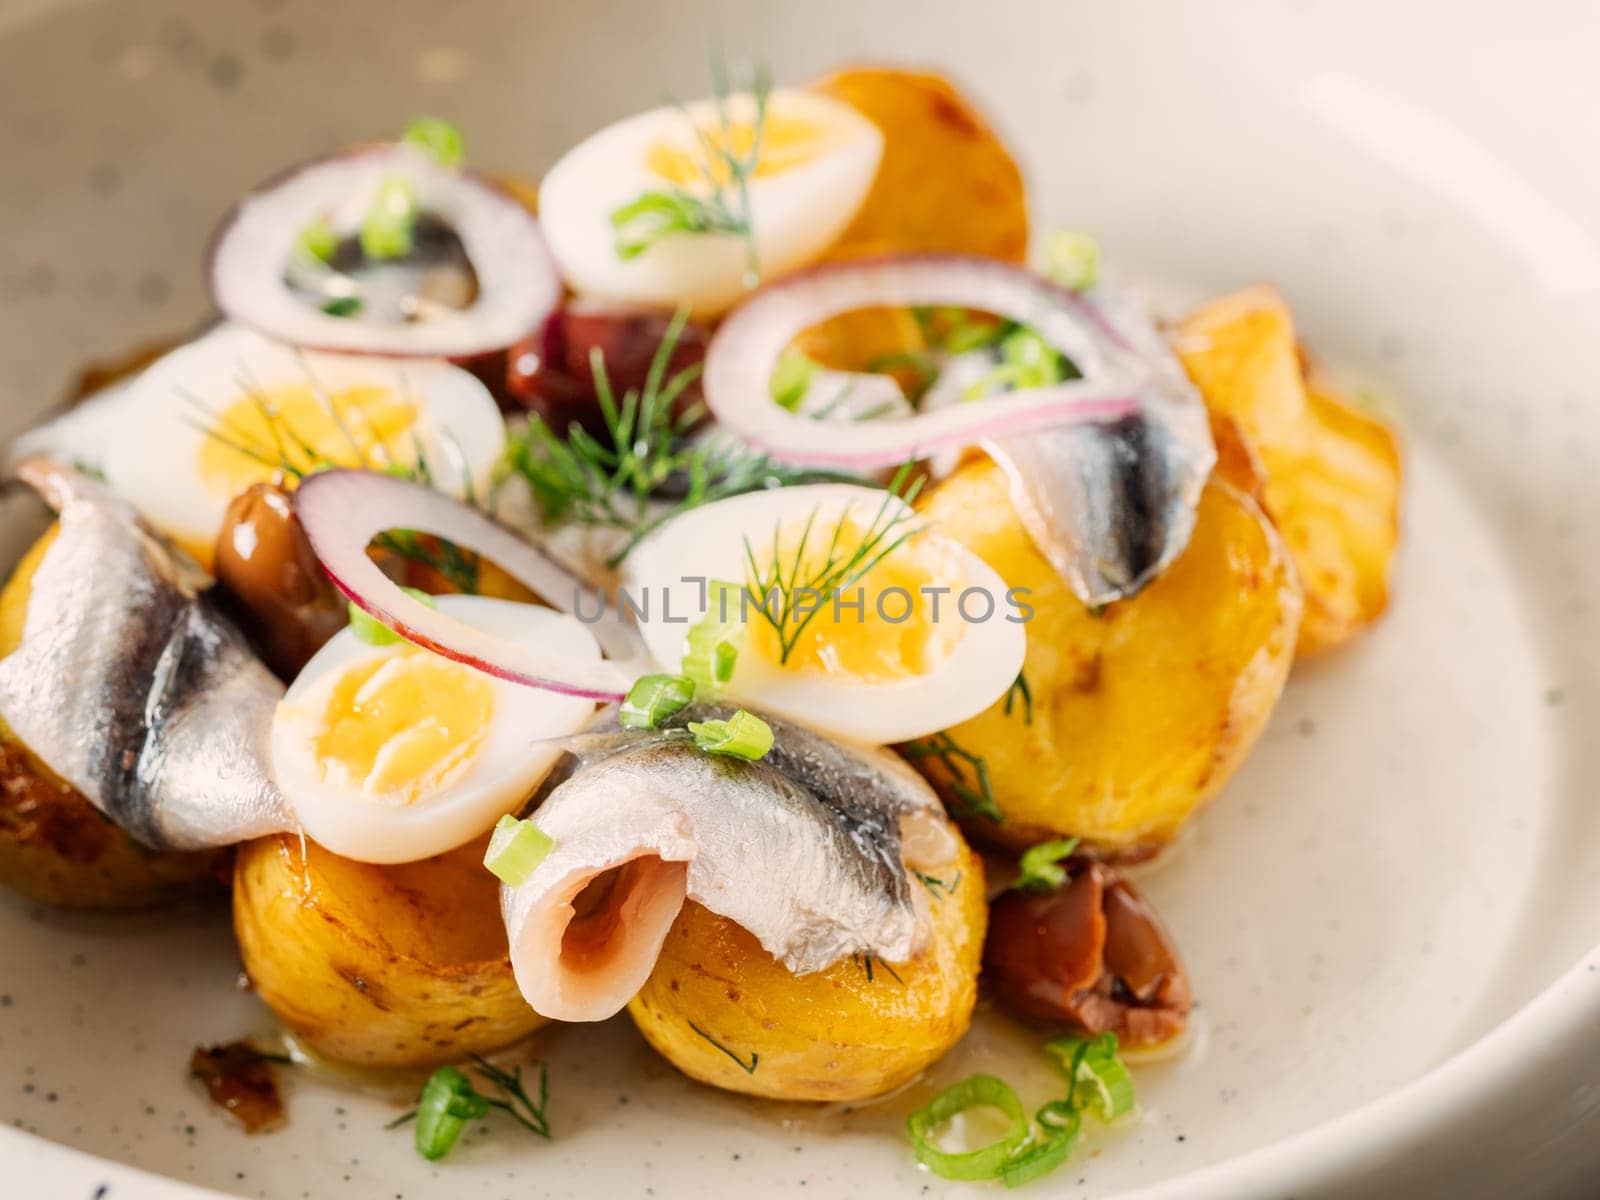 Anchovy or sprat or sardine with potatoes by fascinadora